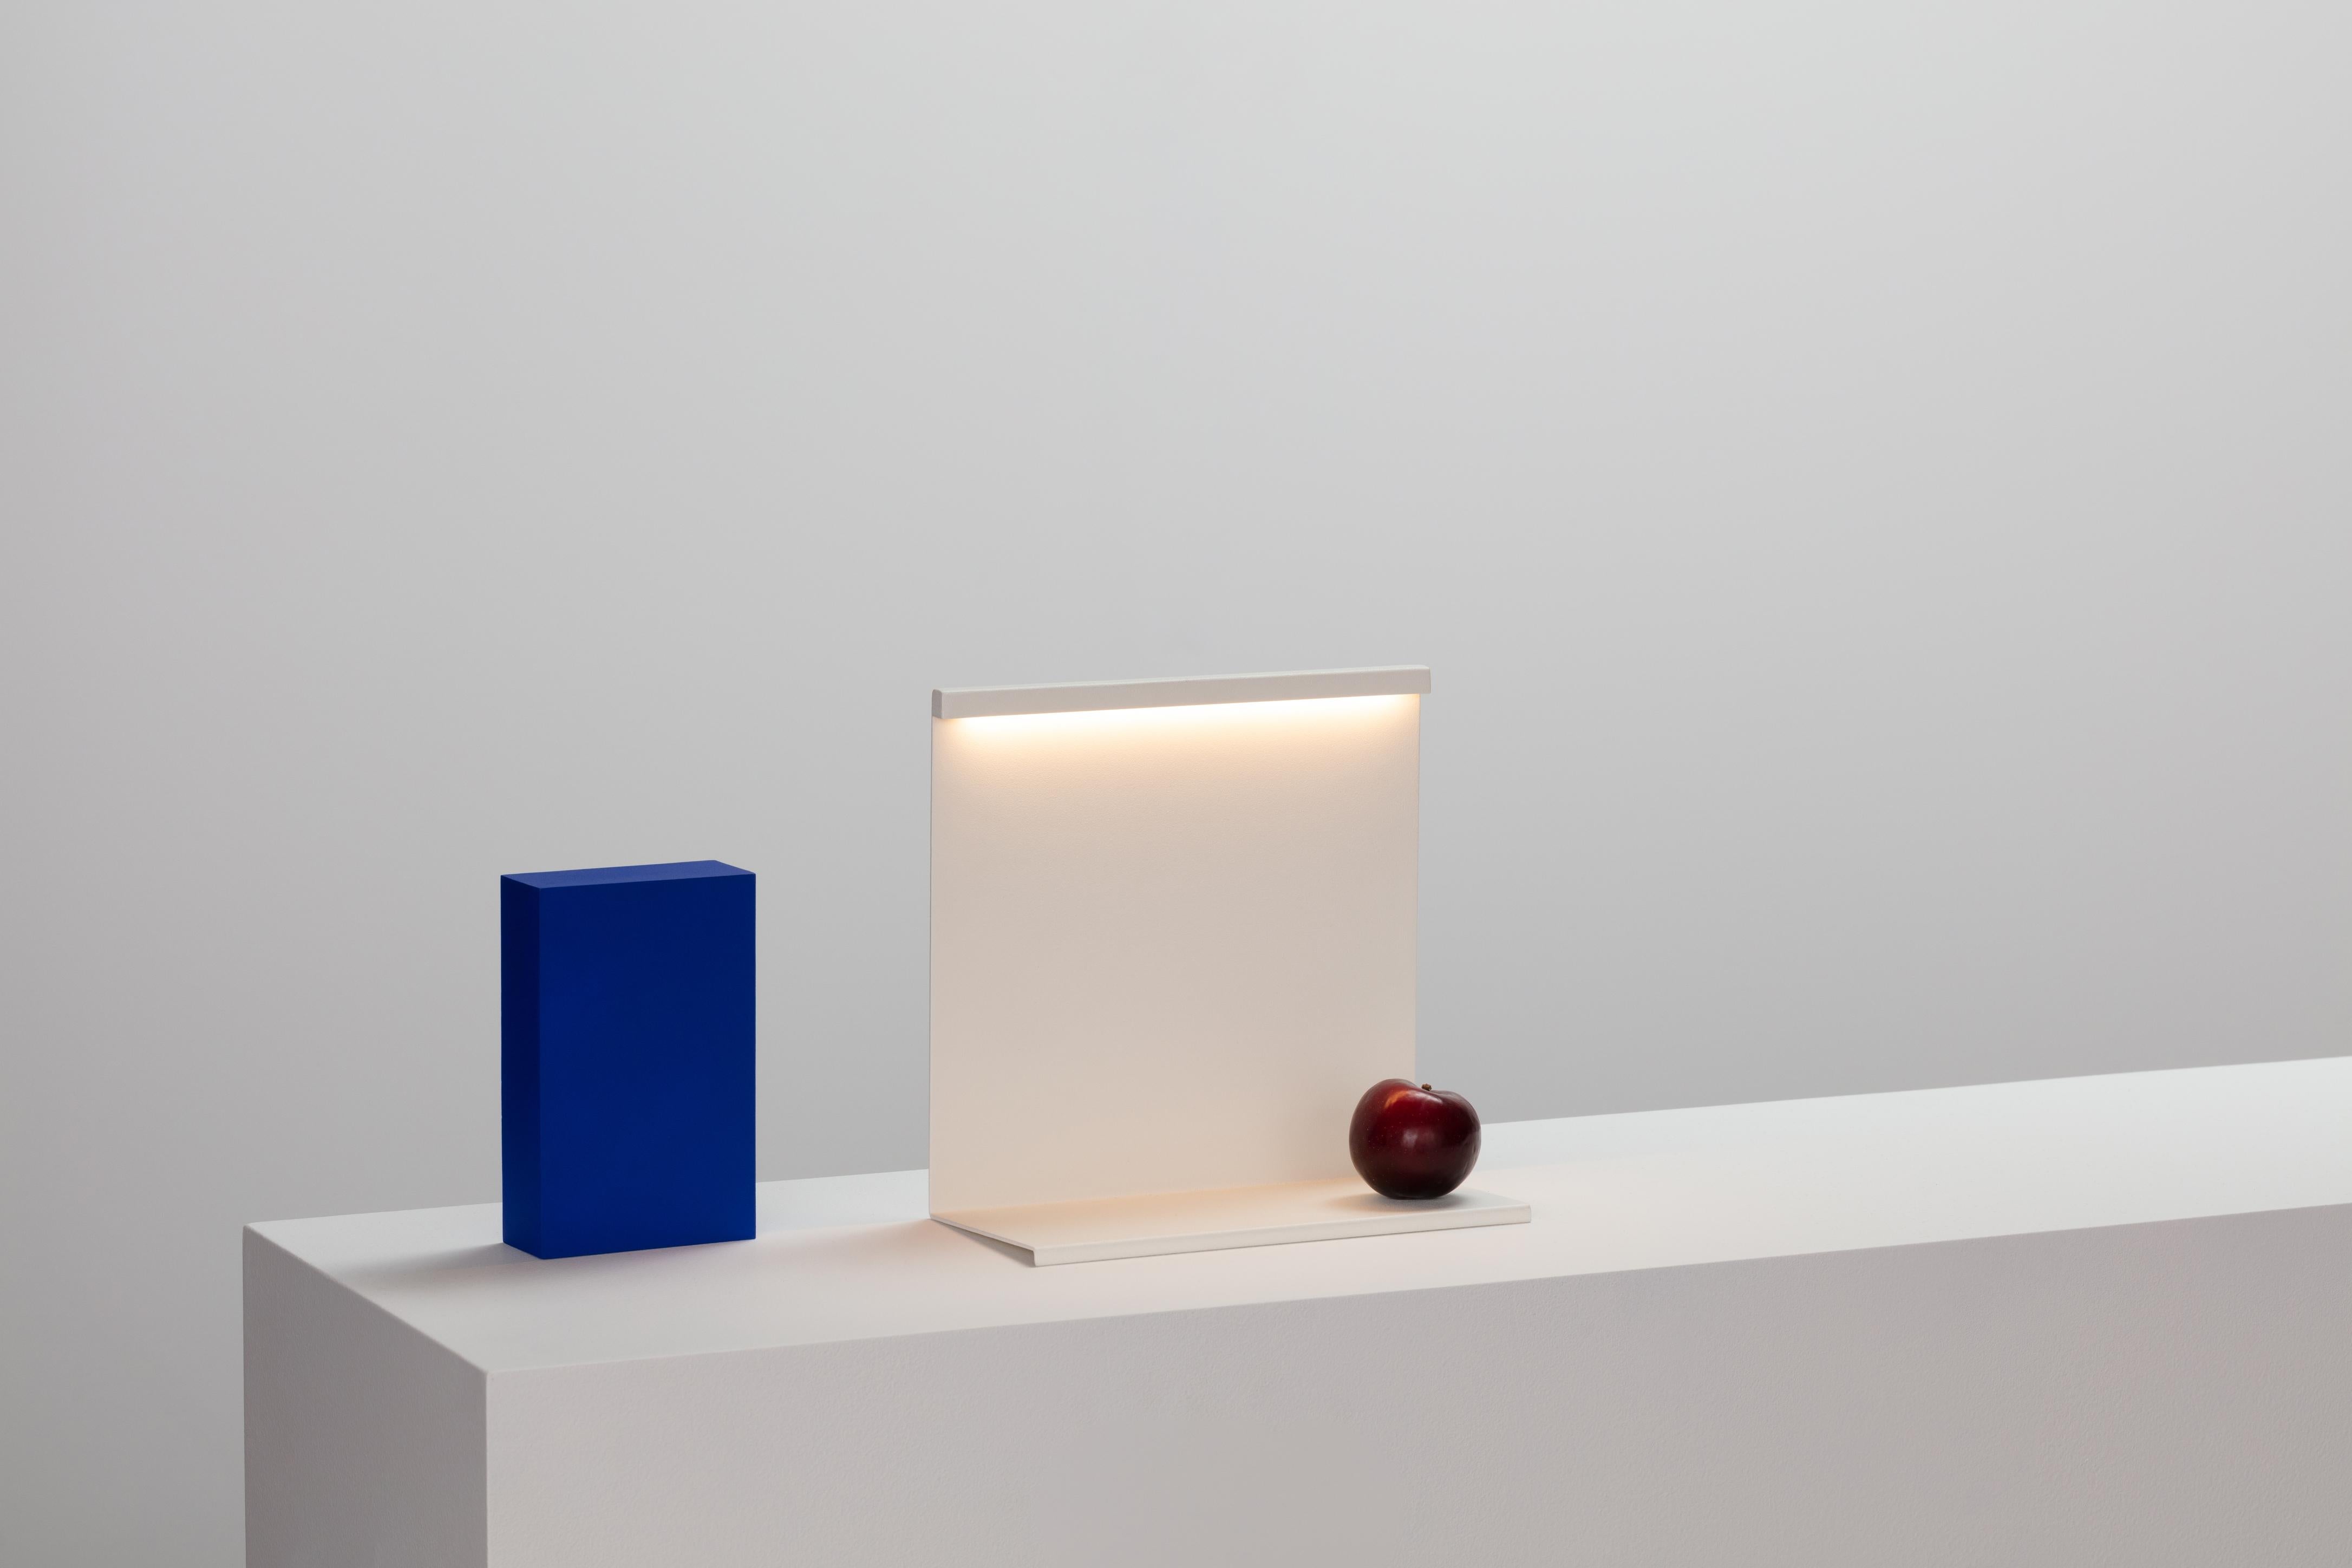 
Inspired by the innovative architecture of fellow Mexican Luis Barragan, Moisés Hernández designed the LBM Table Lamp to reflect his fascination with monolithic geometry, colour, light and shadows. Constructed from thin planes of vertical sheet